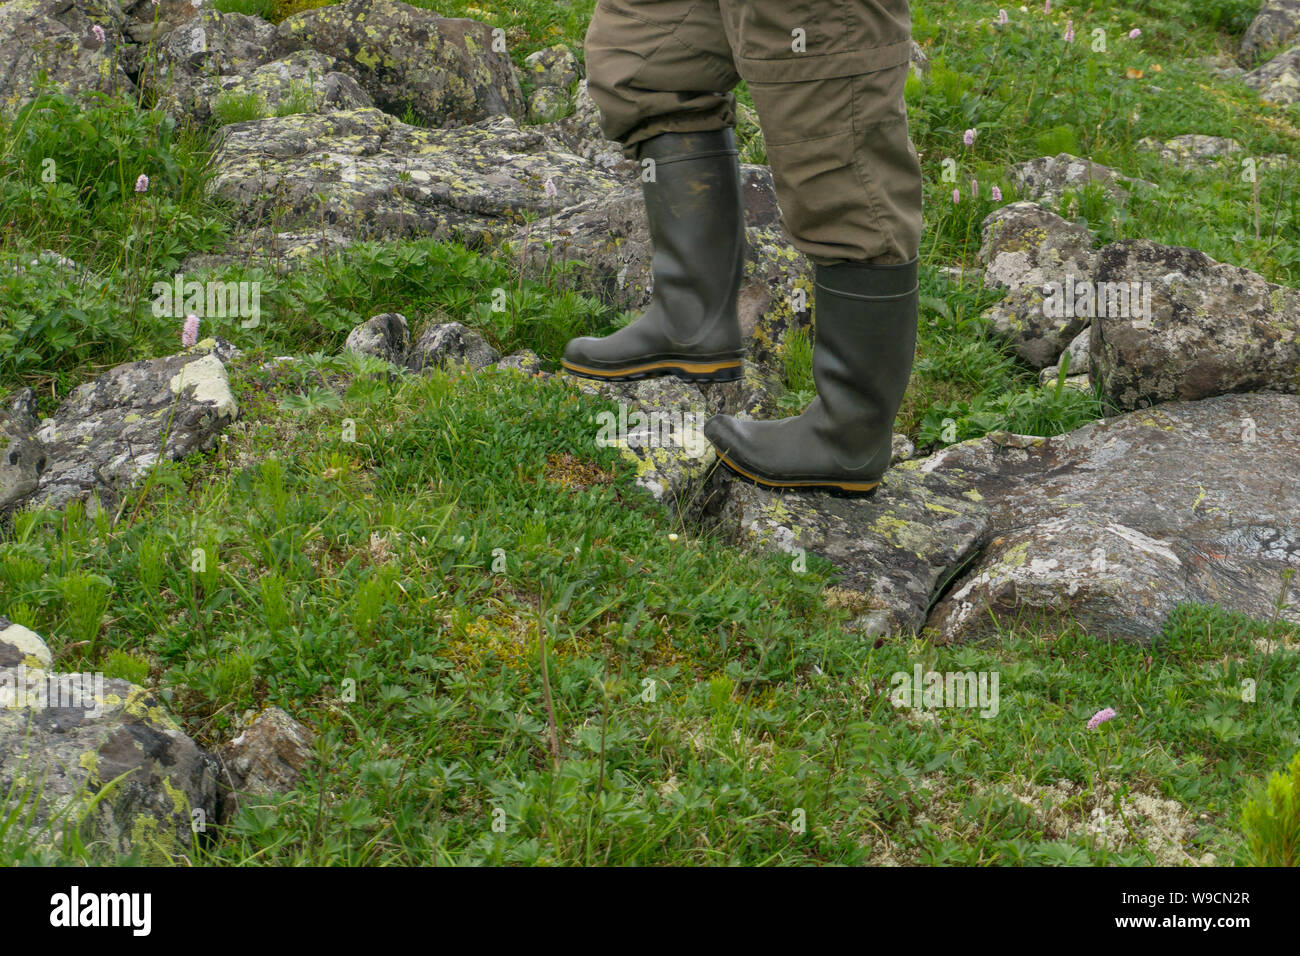 rubber boots for hiking